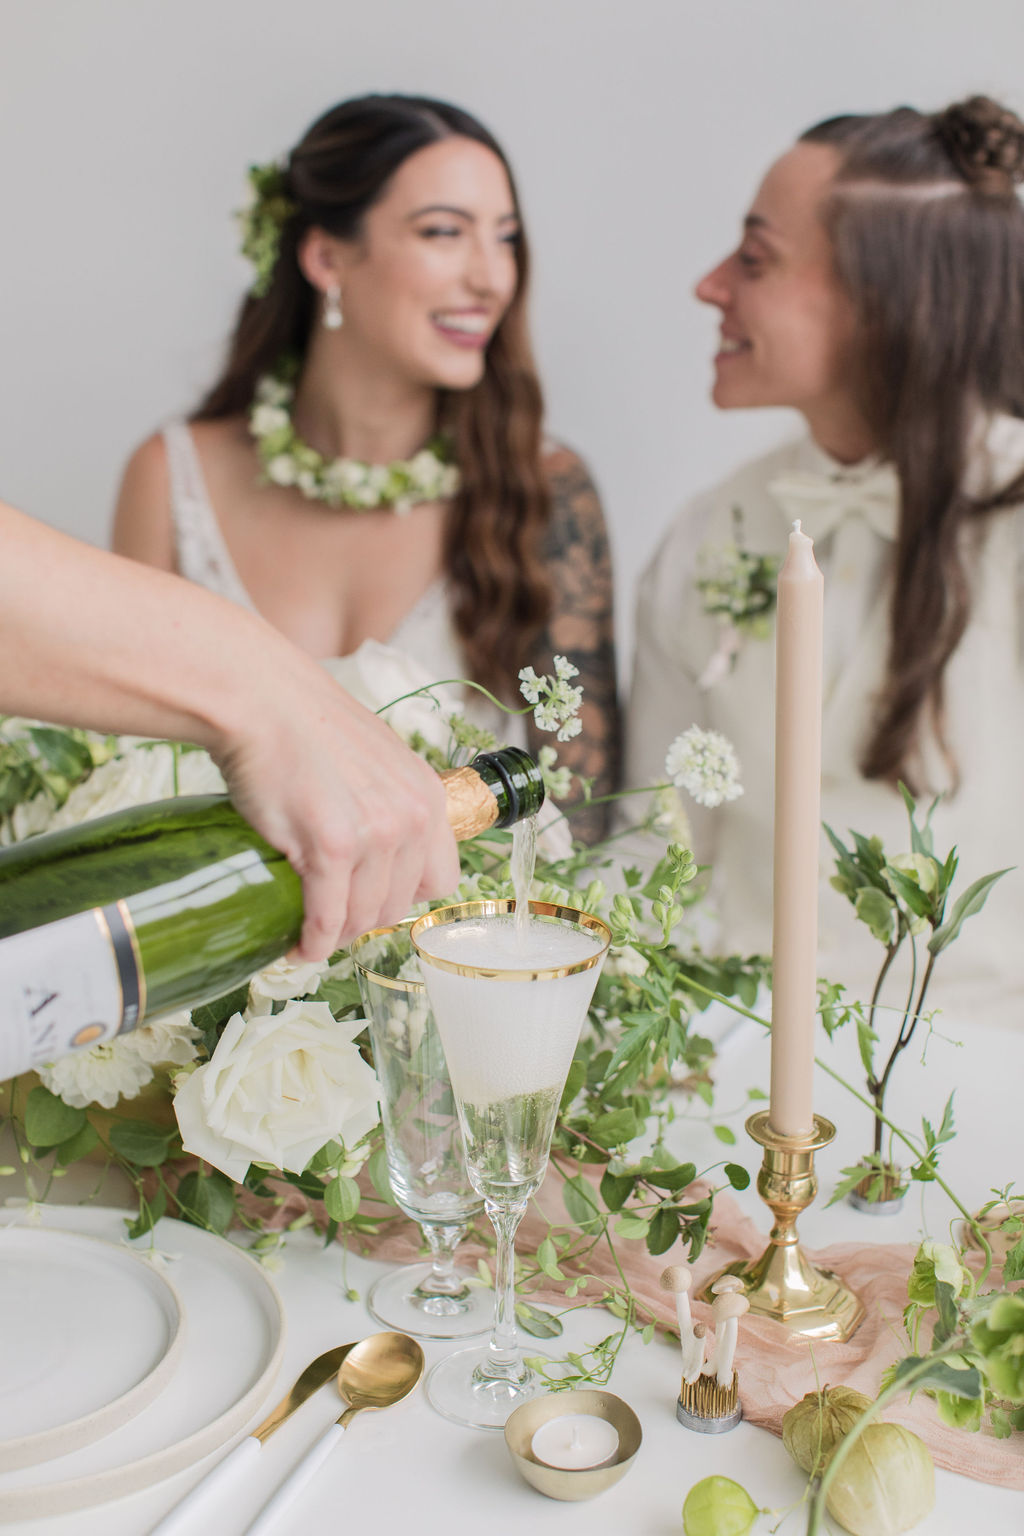 champagne being poured next to white and green florals on a Seattle microwedding table indoors